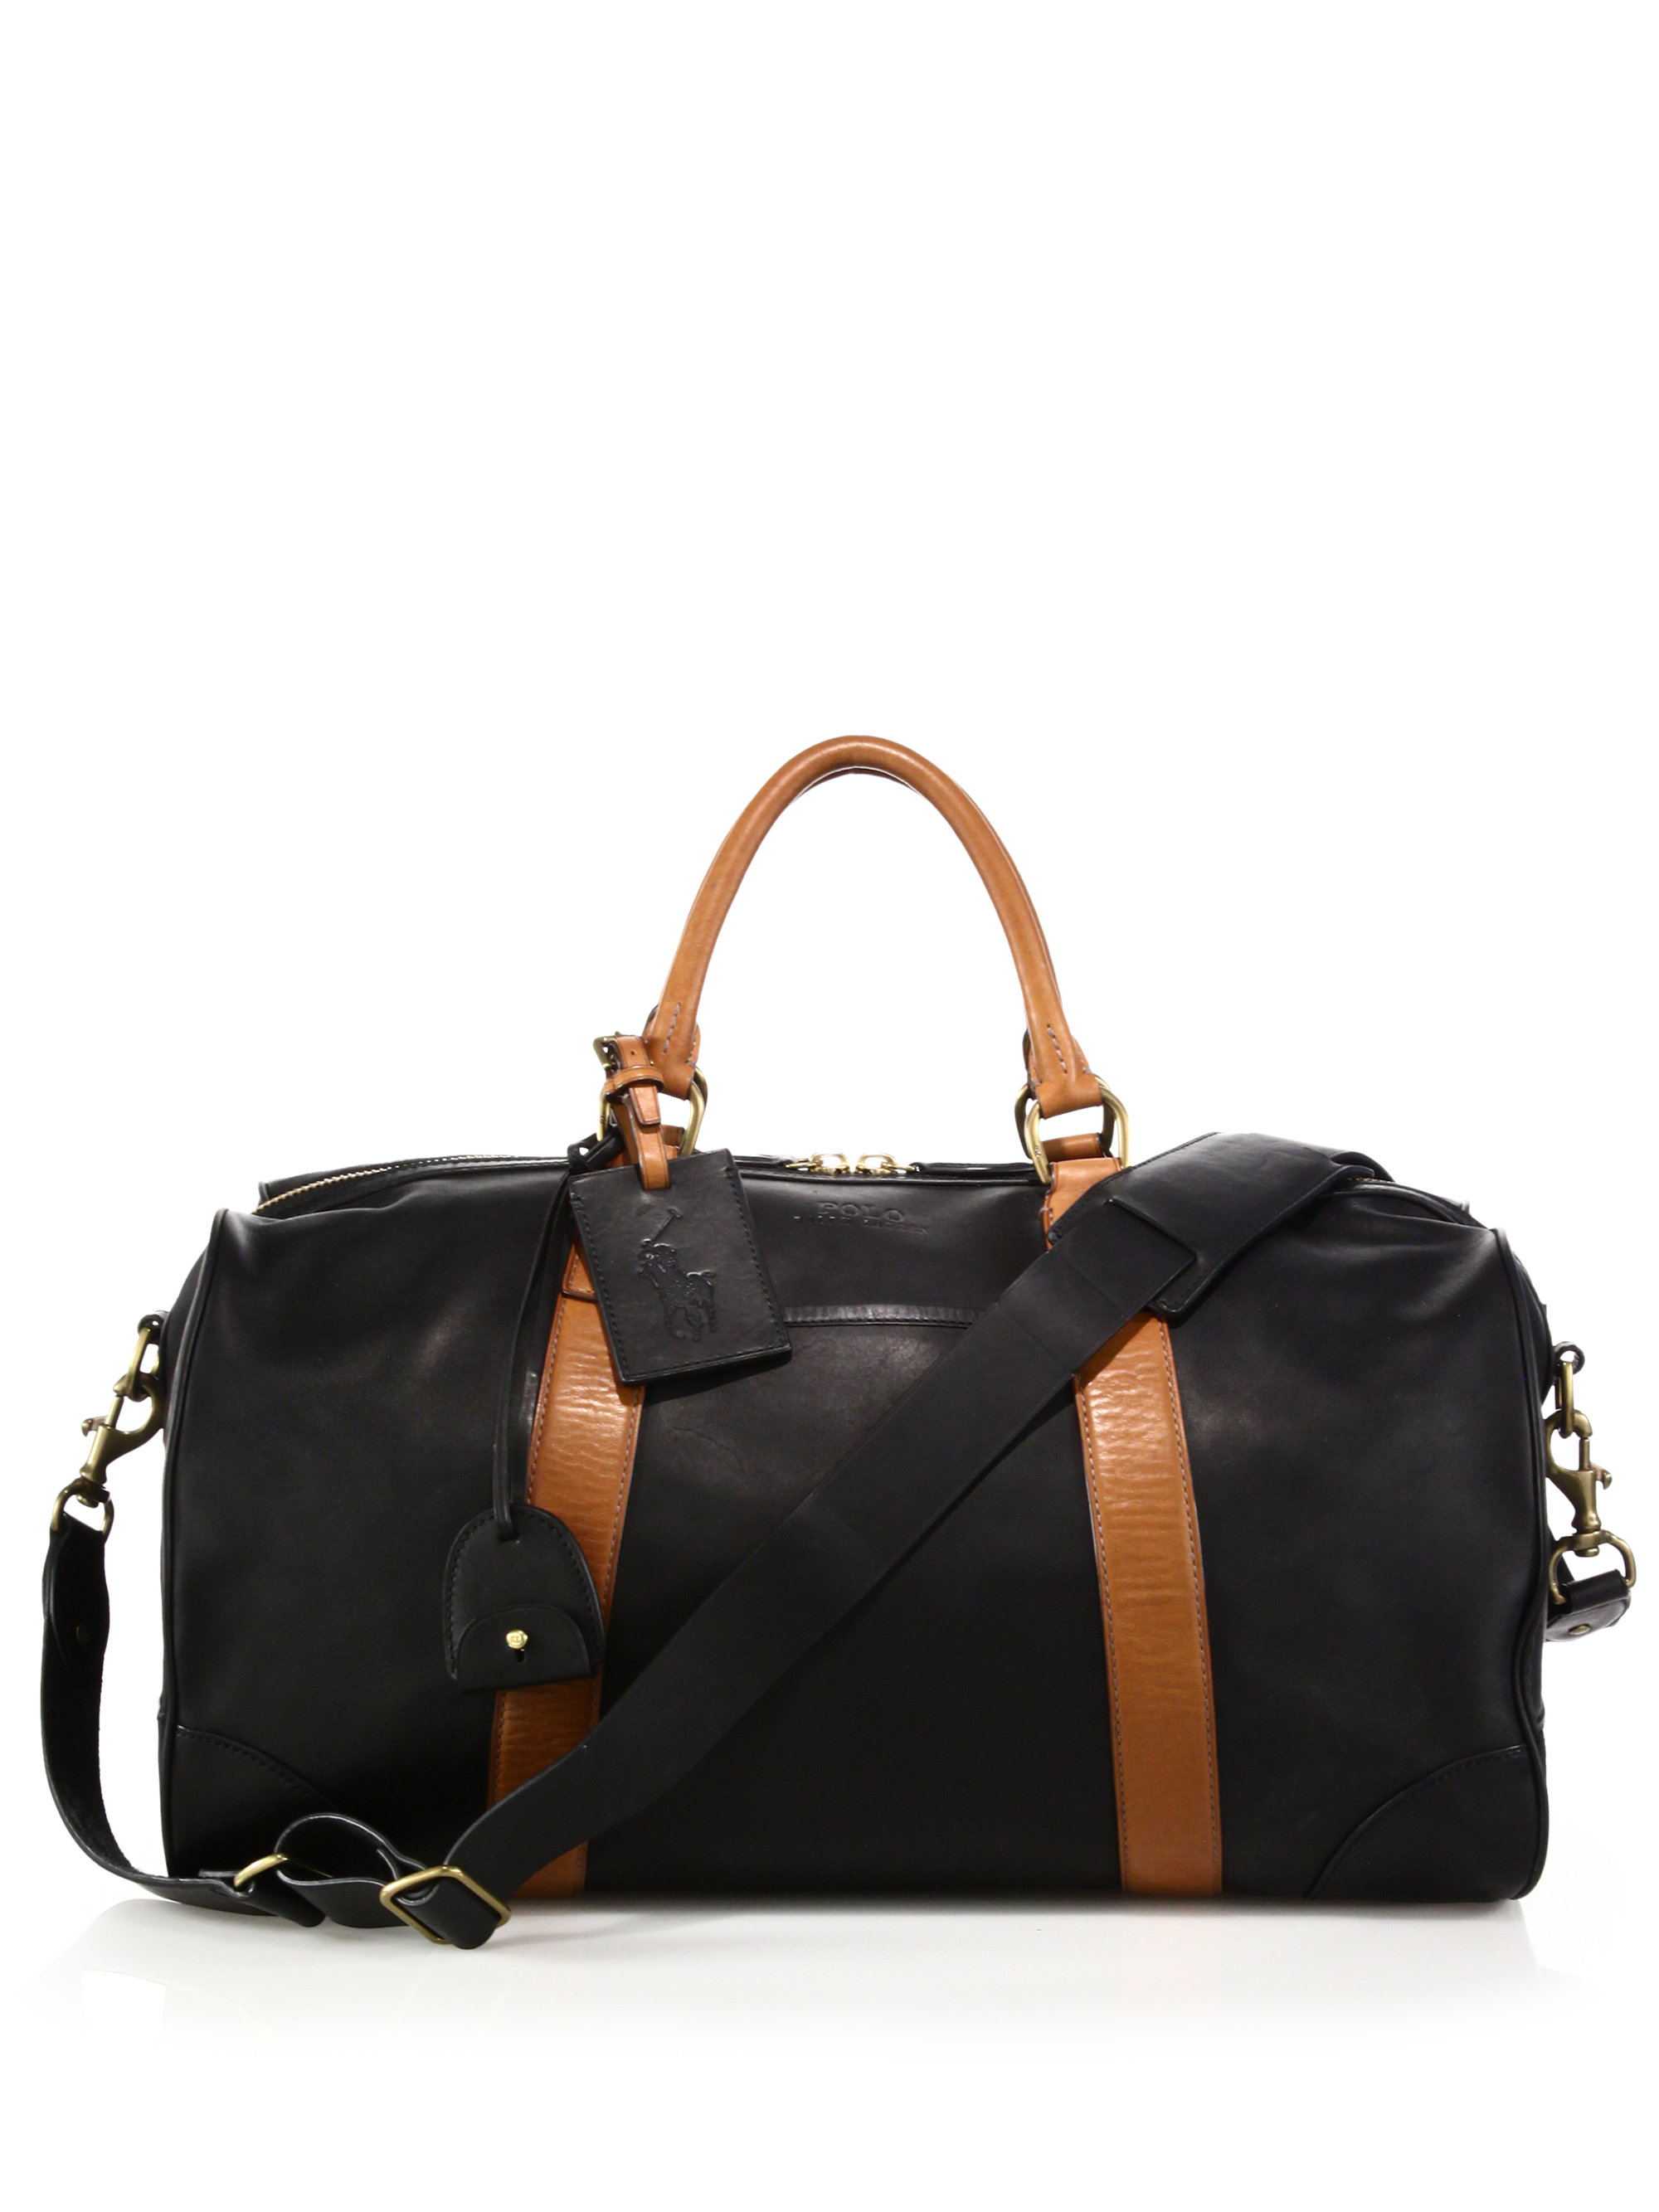 Polo ralph lauren Two-toned Leather Duffel Bag in Black for Men | Lyst